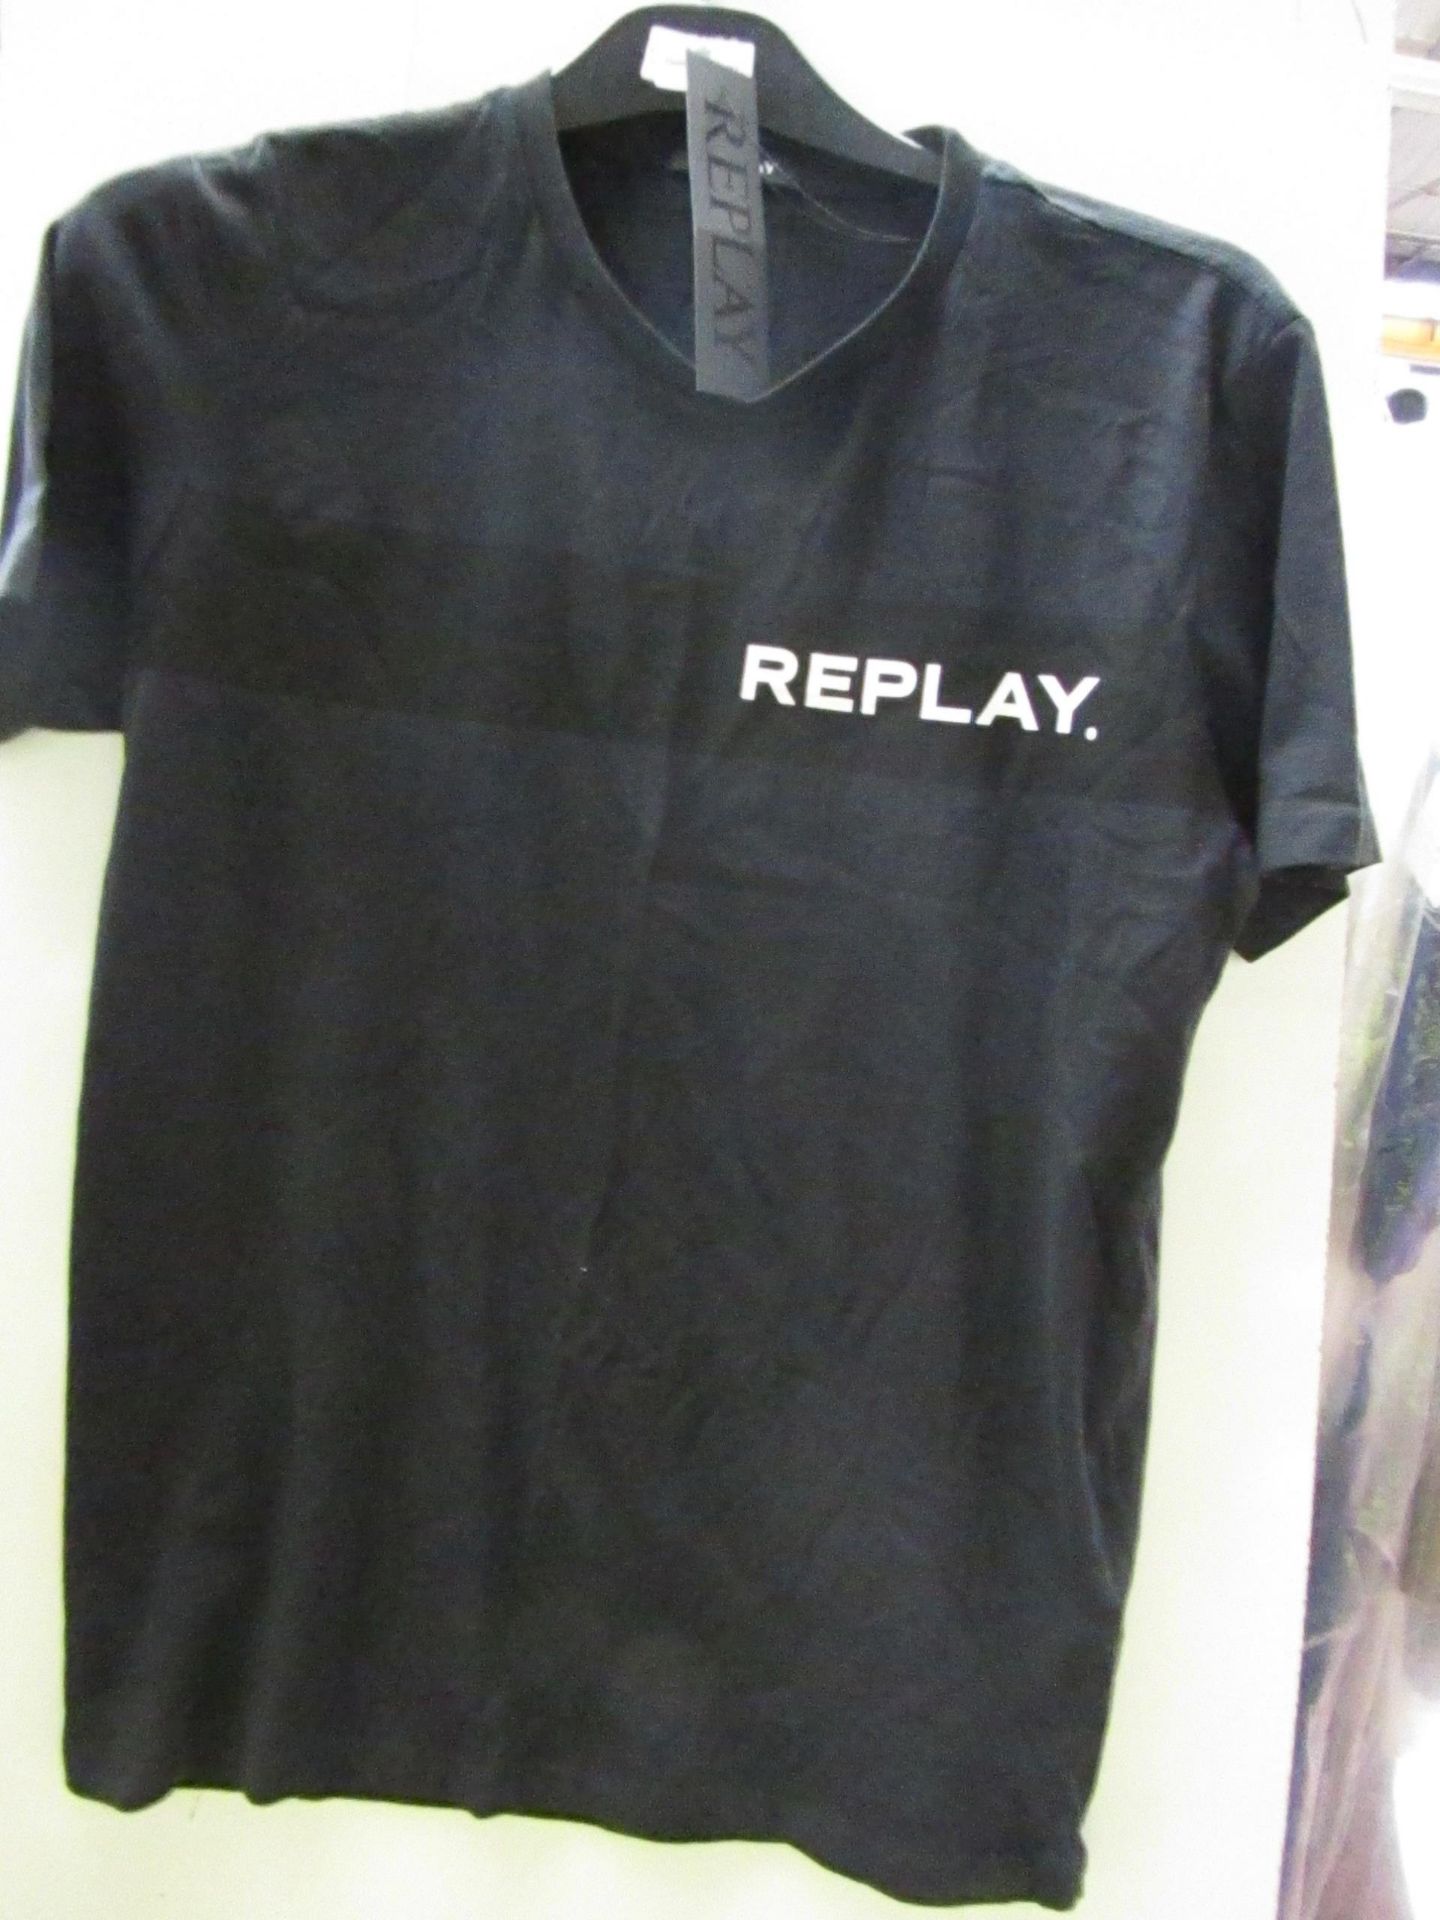 Replay T/Shirt Black Size M New With Tags